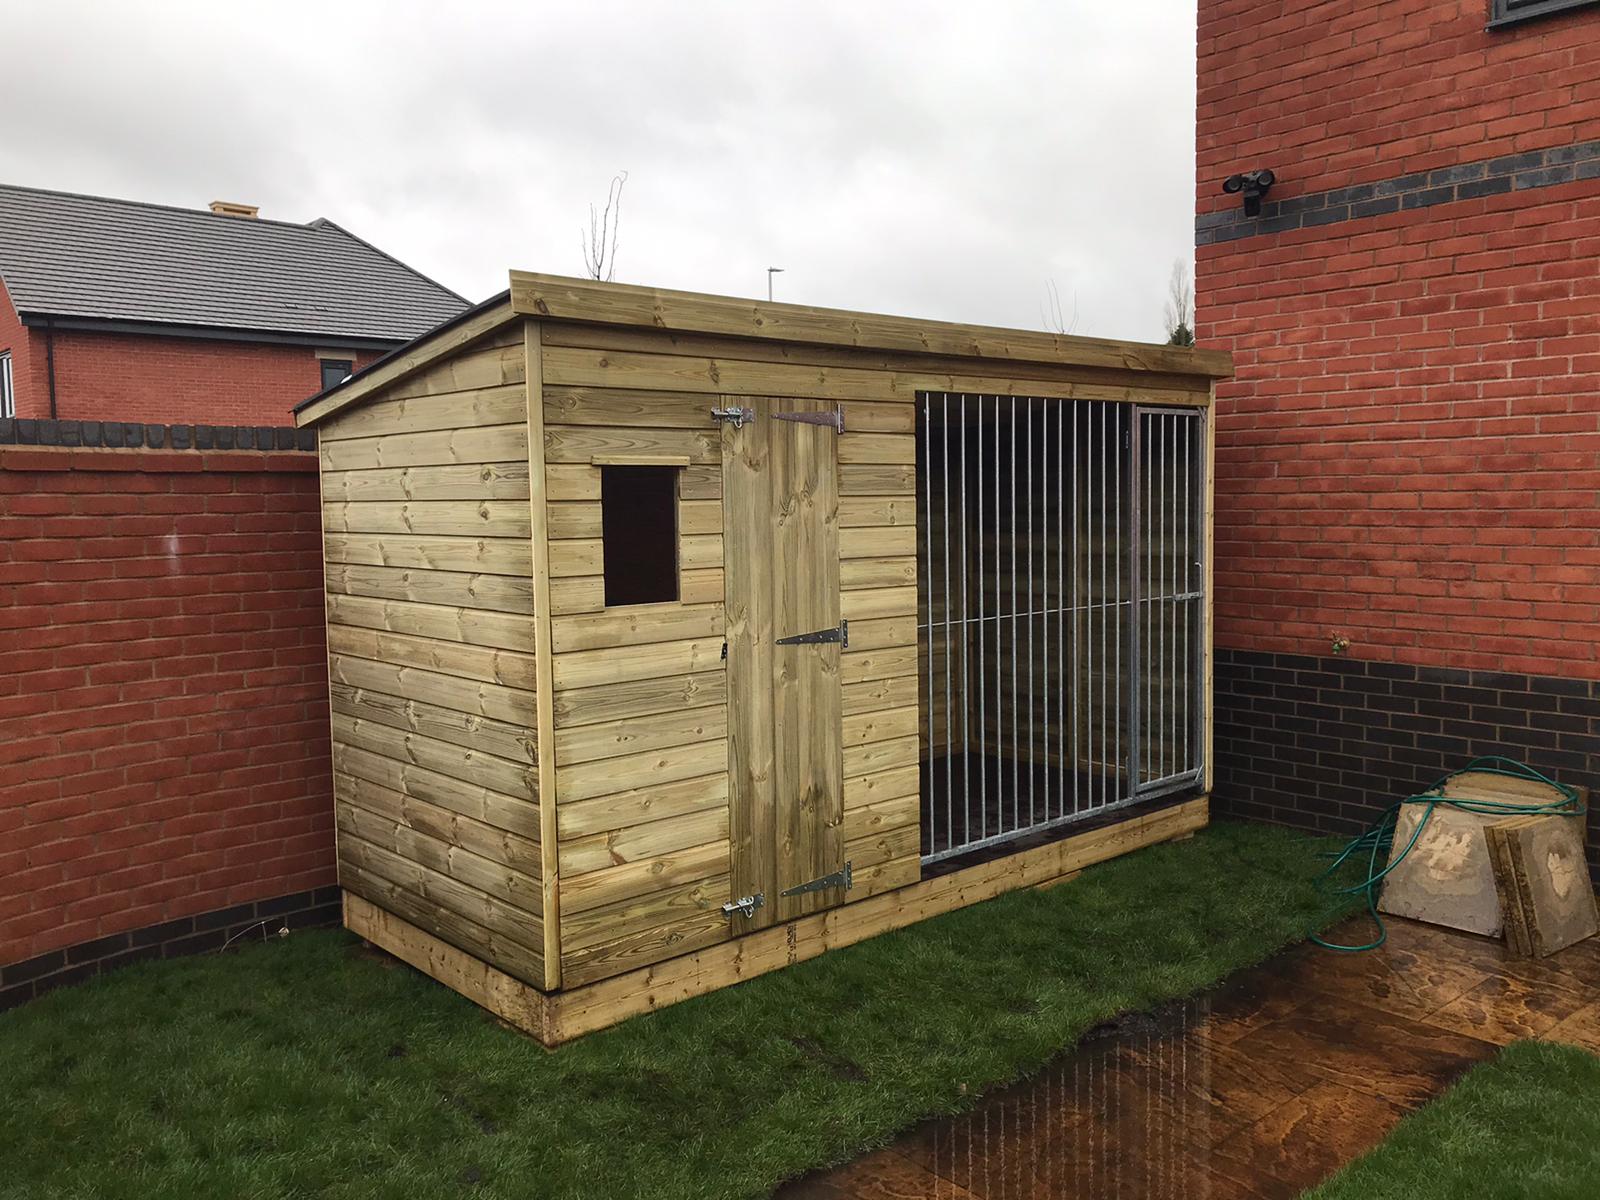 Stapeley Dog Kennel 12ft (wide) x 4ft (deep) x 6'6ft (high)